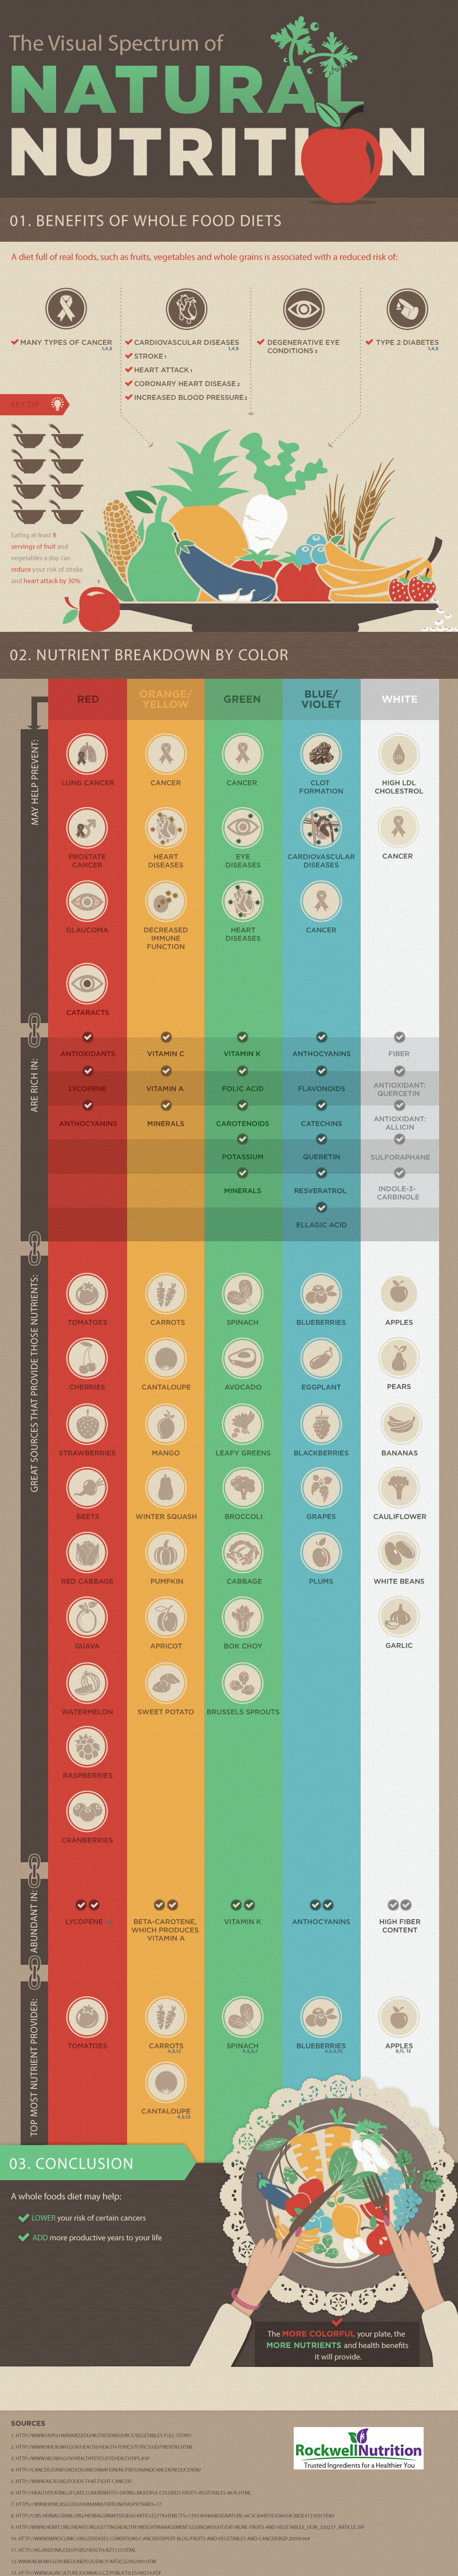 The Visual Spectrum of Natural Food